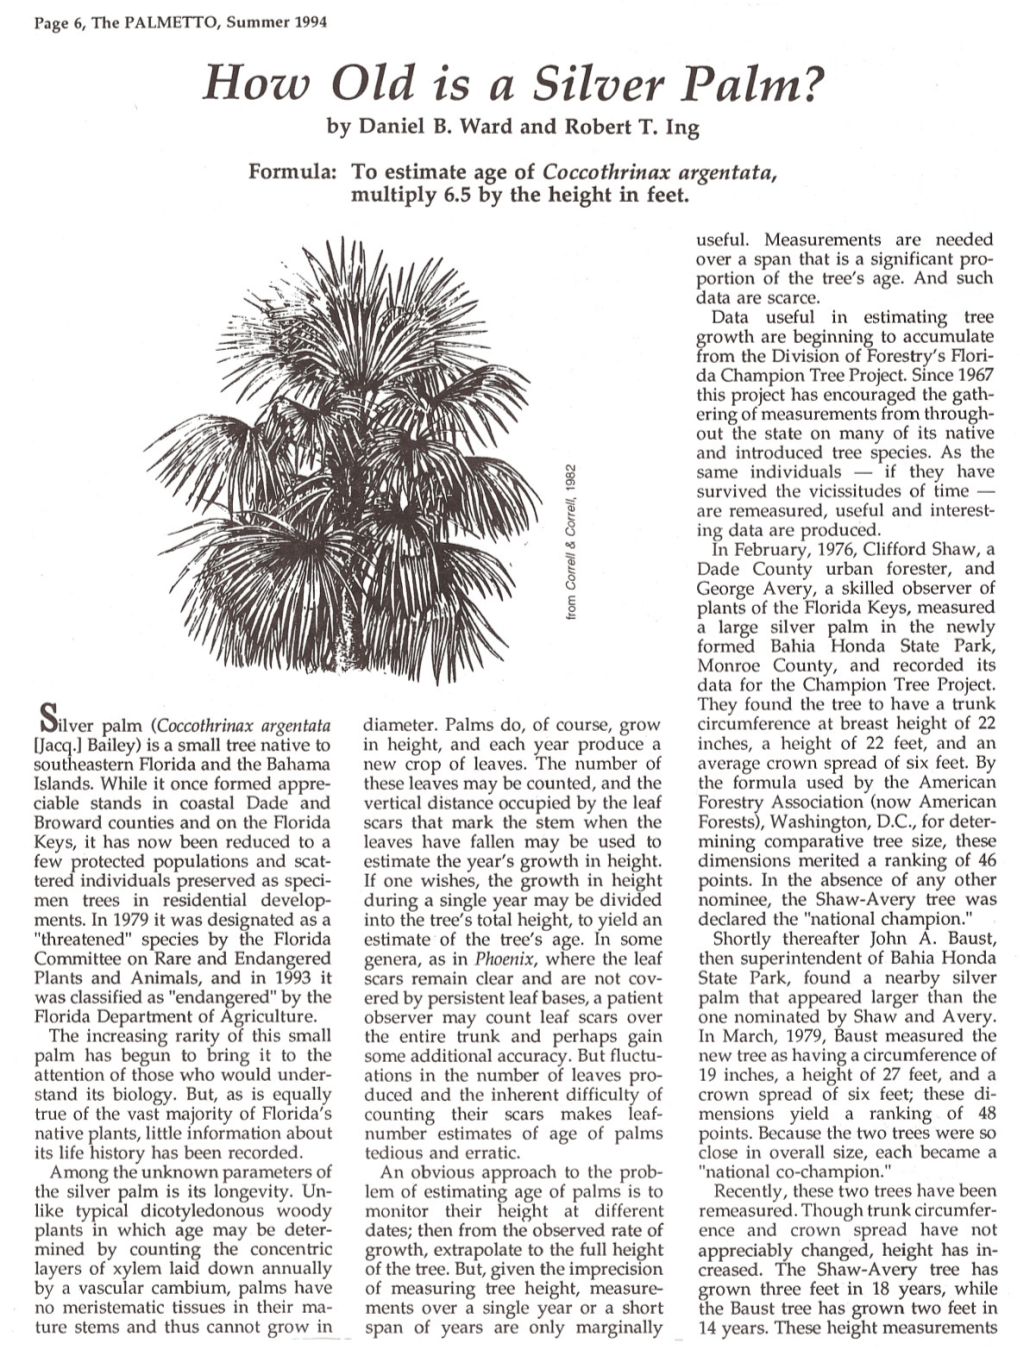 How Old Is a Silver Palm? by Daniel B